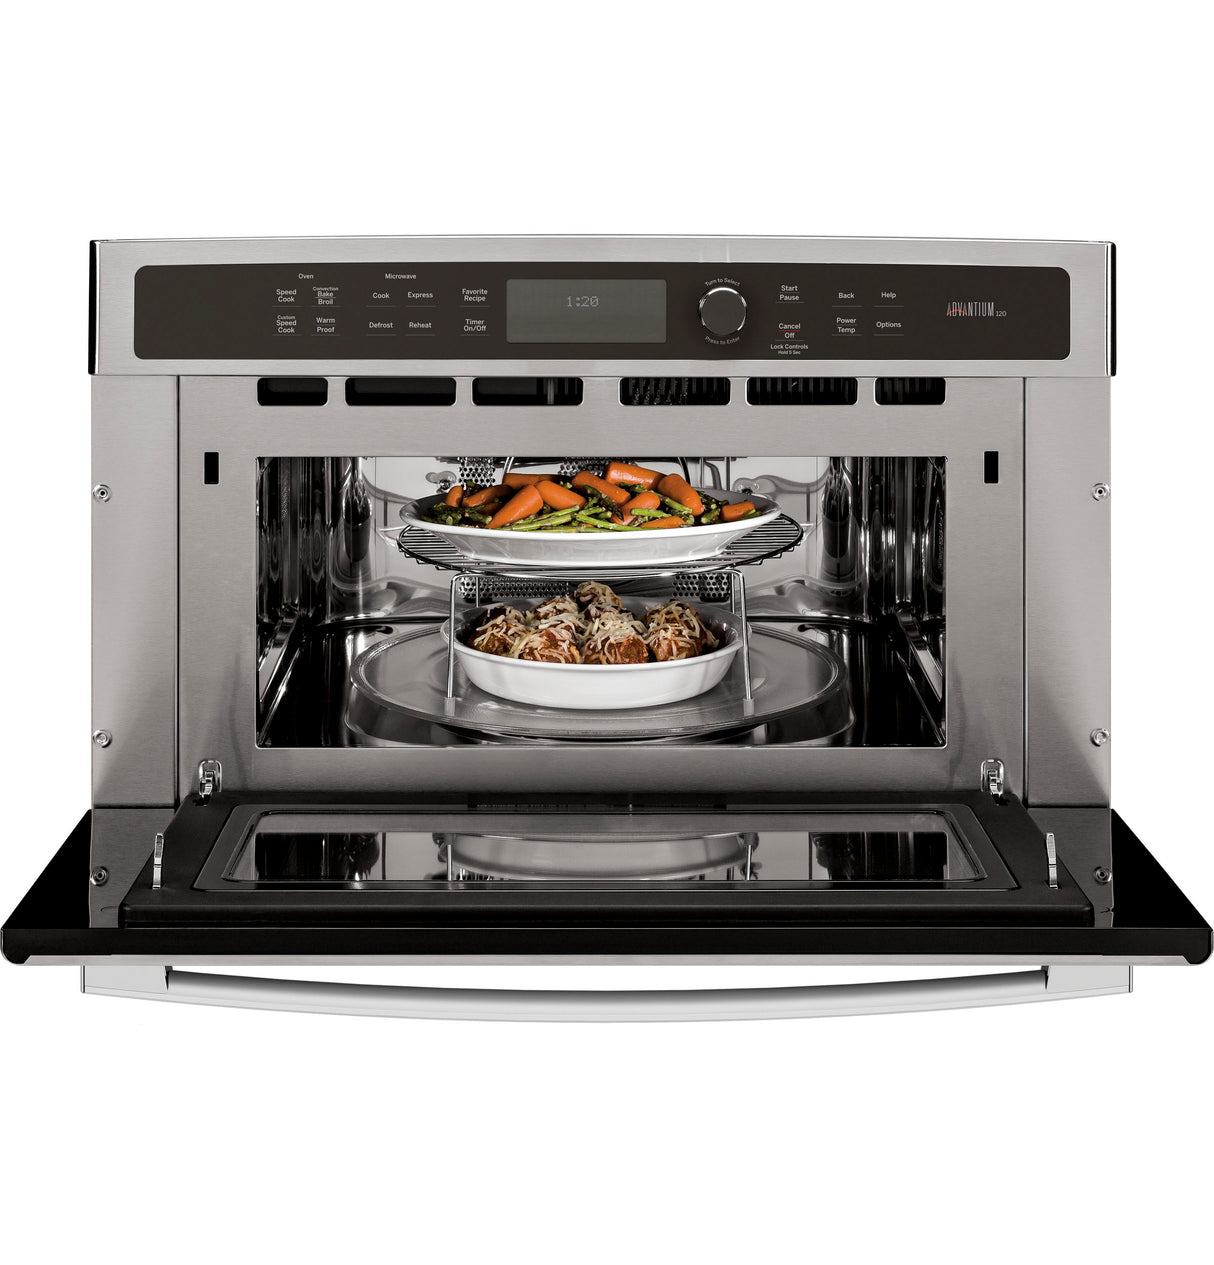 GE Profile(TM) 30 in. Single Wall Oven with Advantium(R) Technology - (PSB9120SFSS)